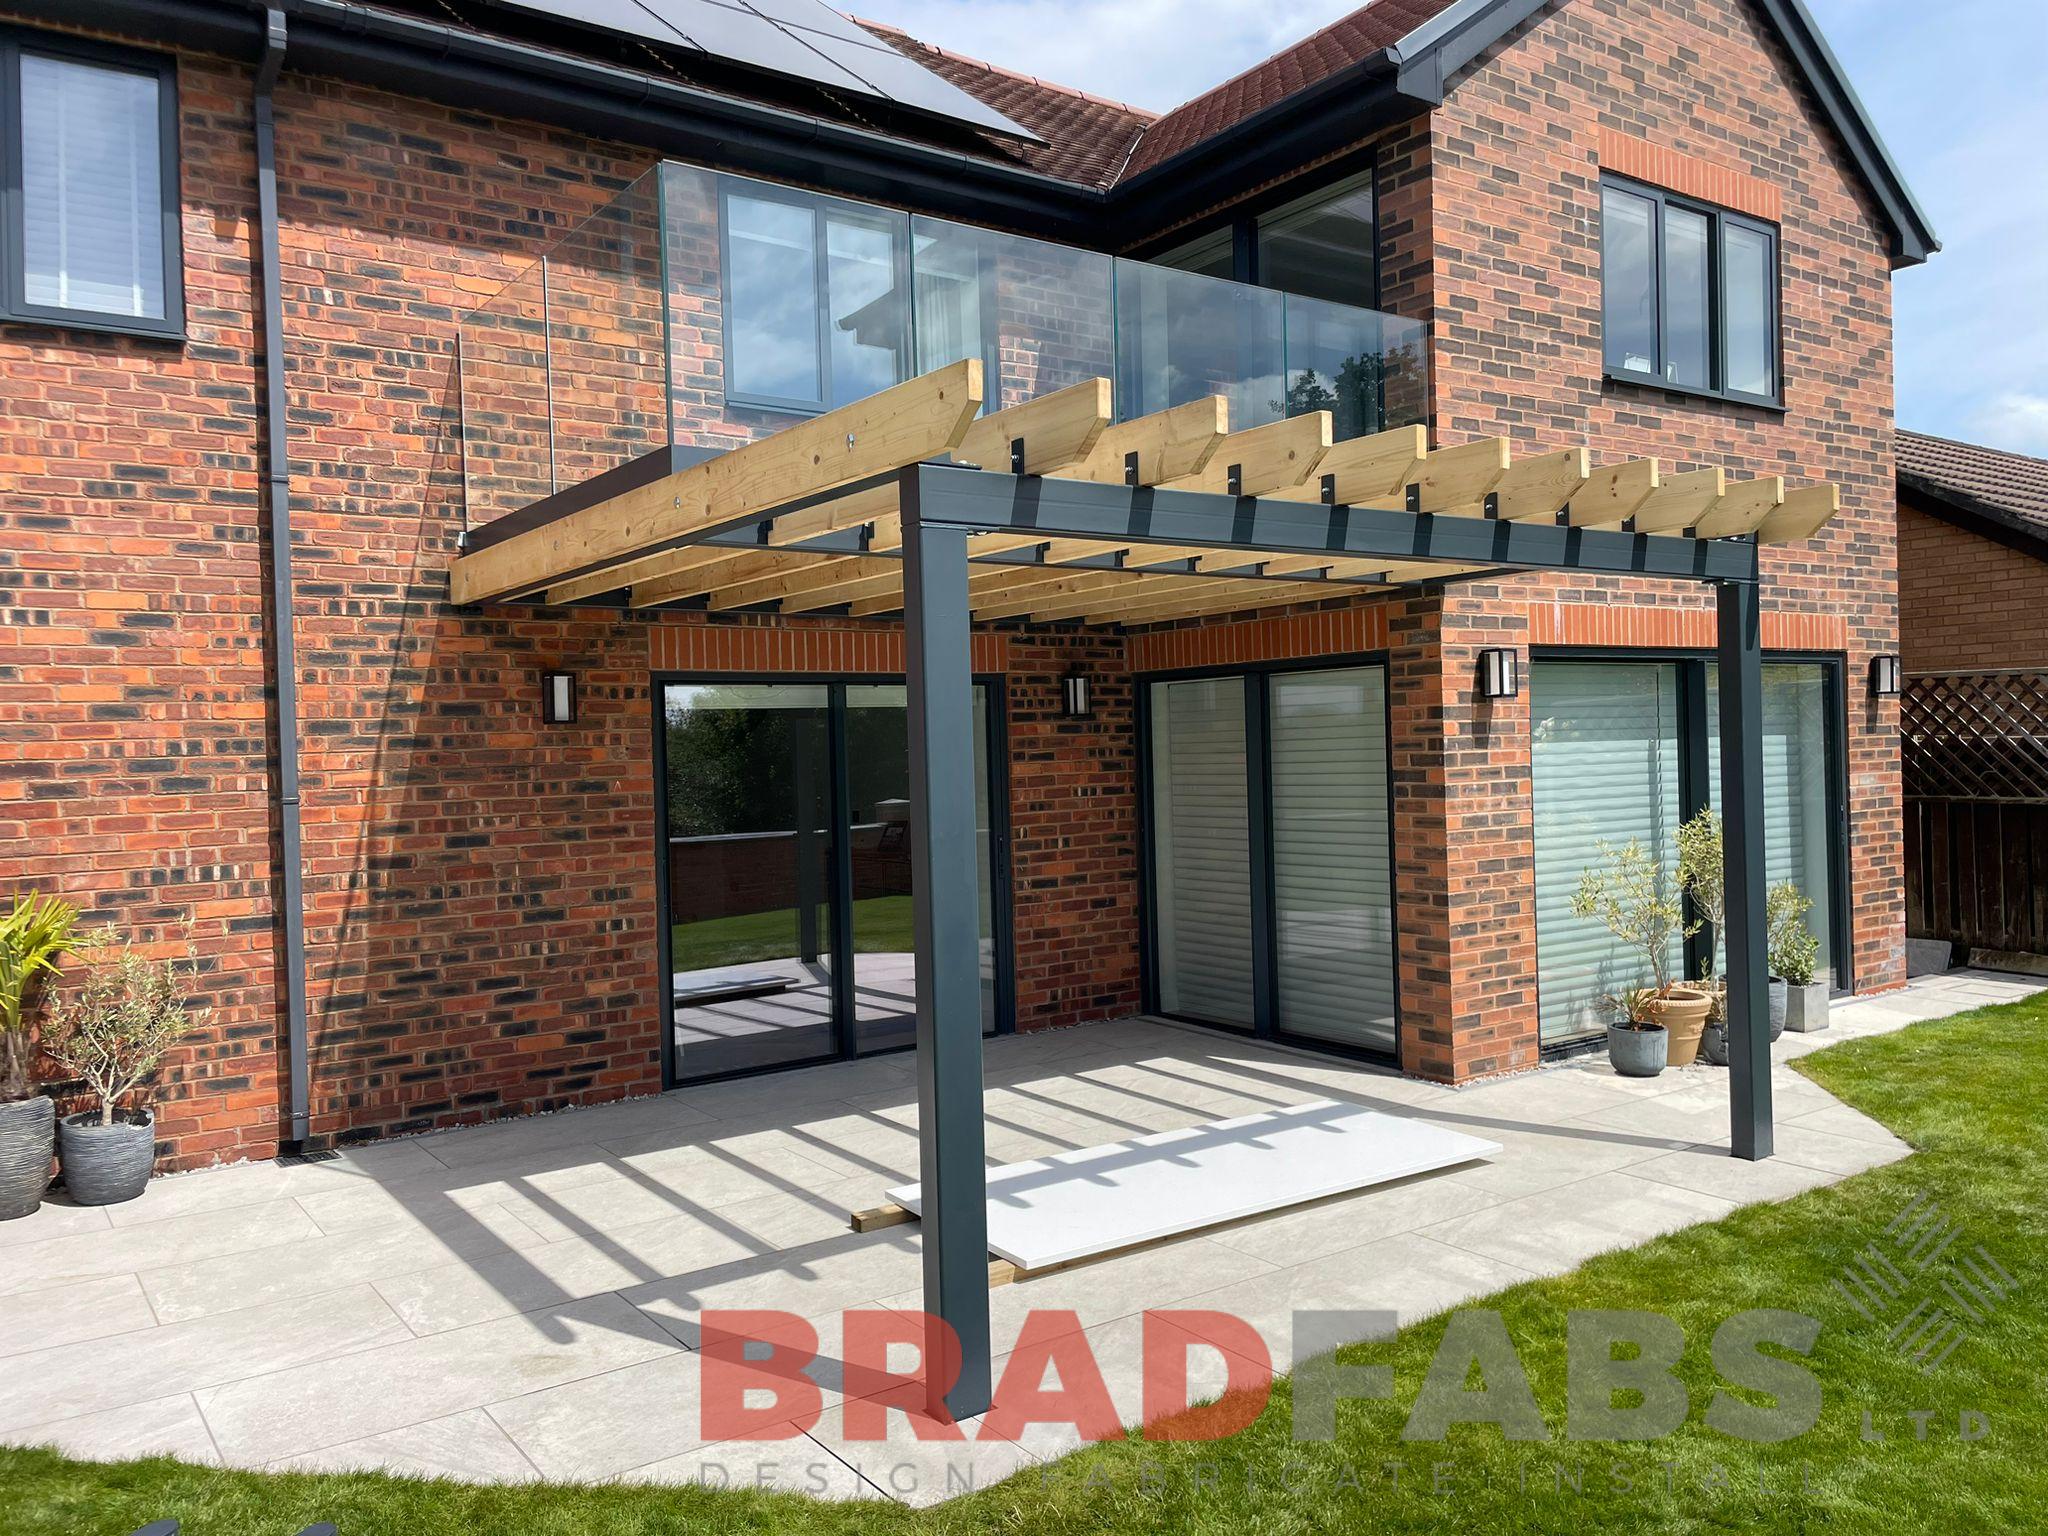 Balcony with pergola style section, steel balcony frame with glass balustrade, Bradfabs design 